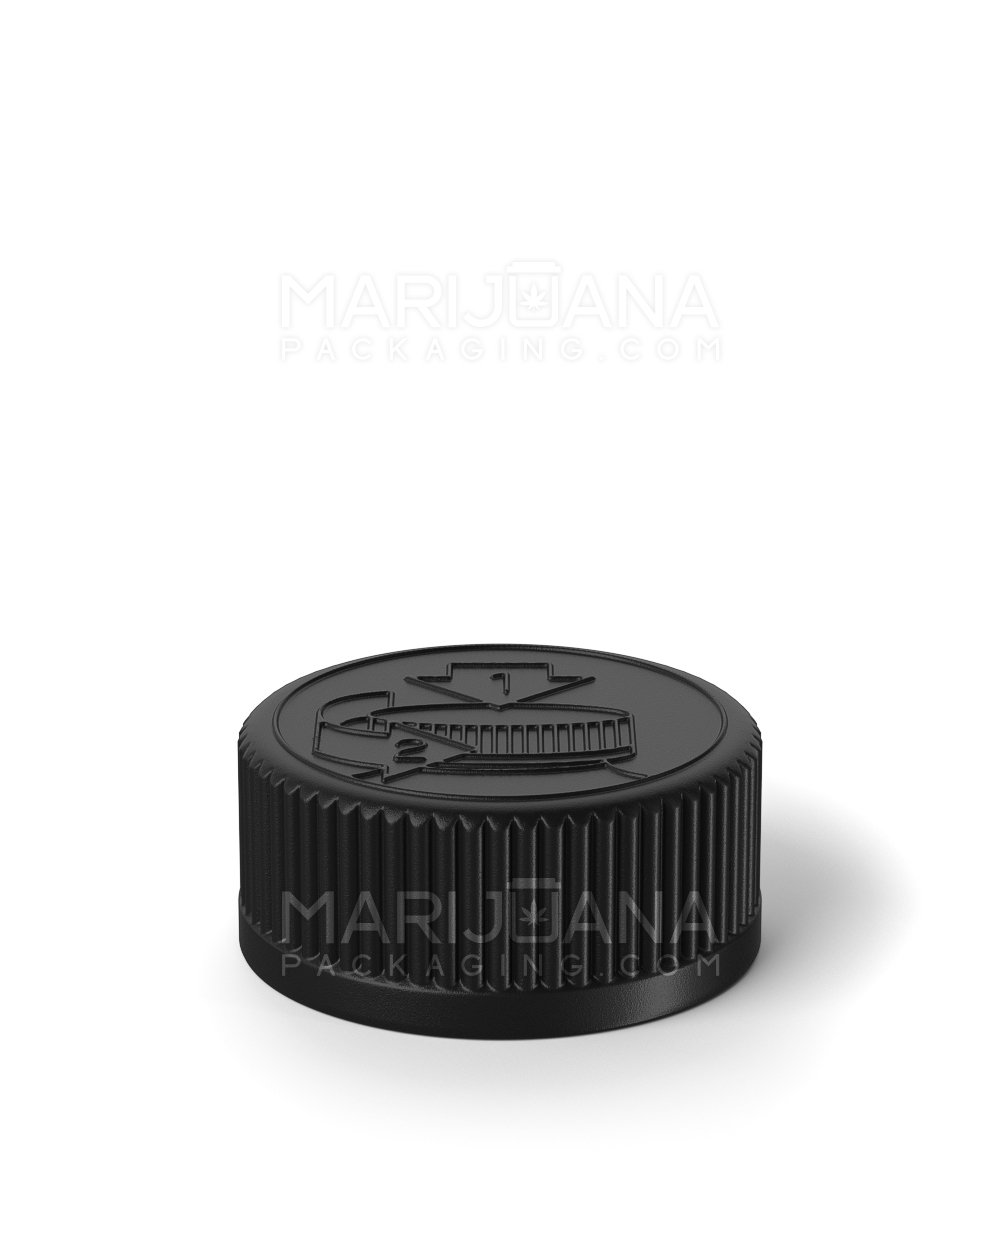 Child Resistant | Push Down & Turn Concentrate Container | 15mL - Black - 500 Count - 8